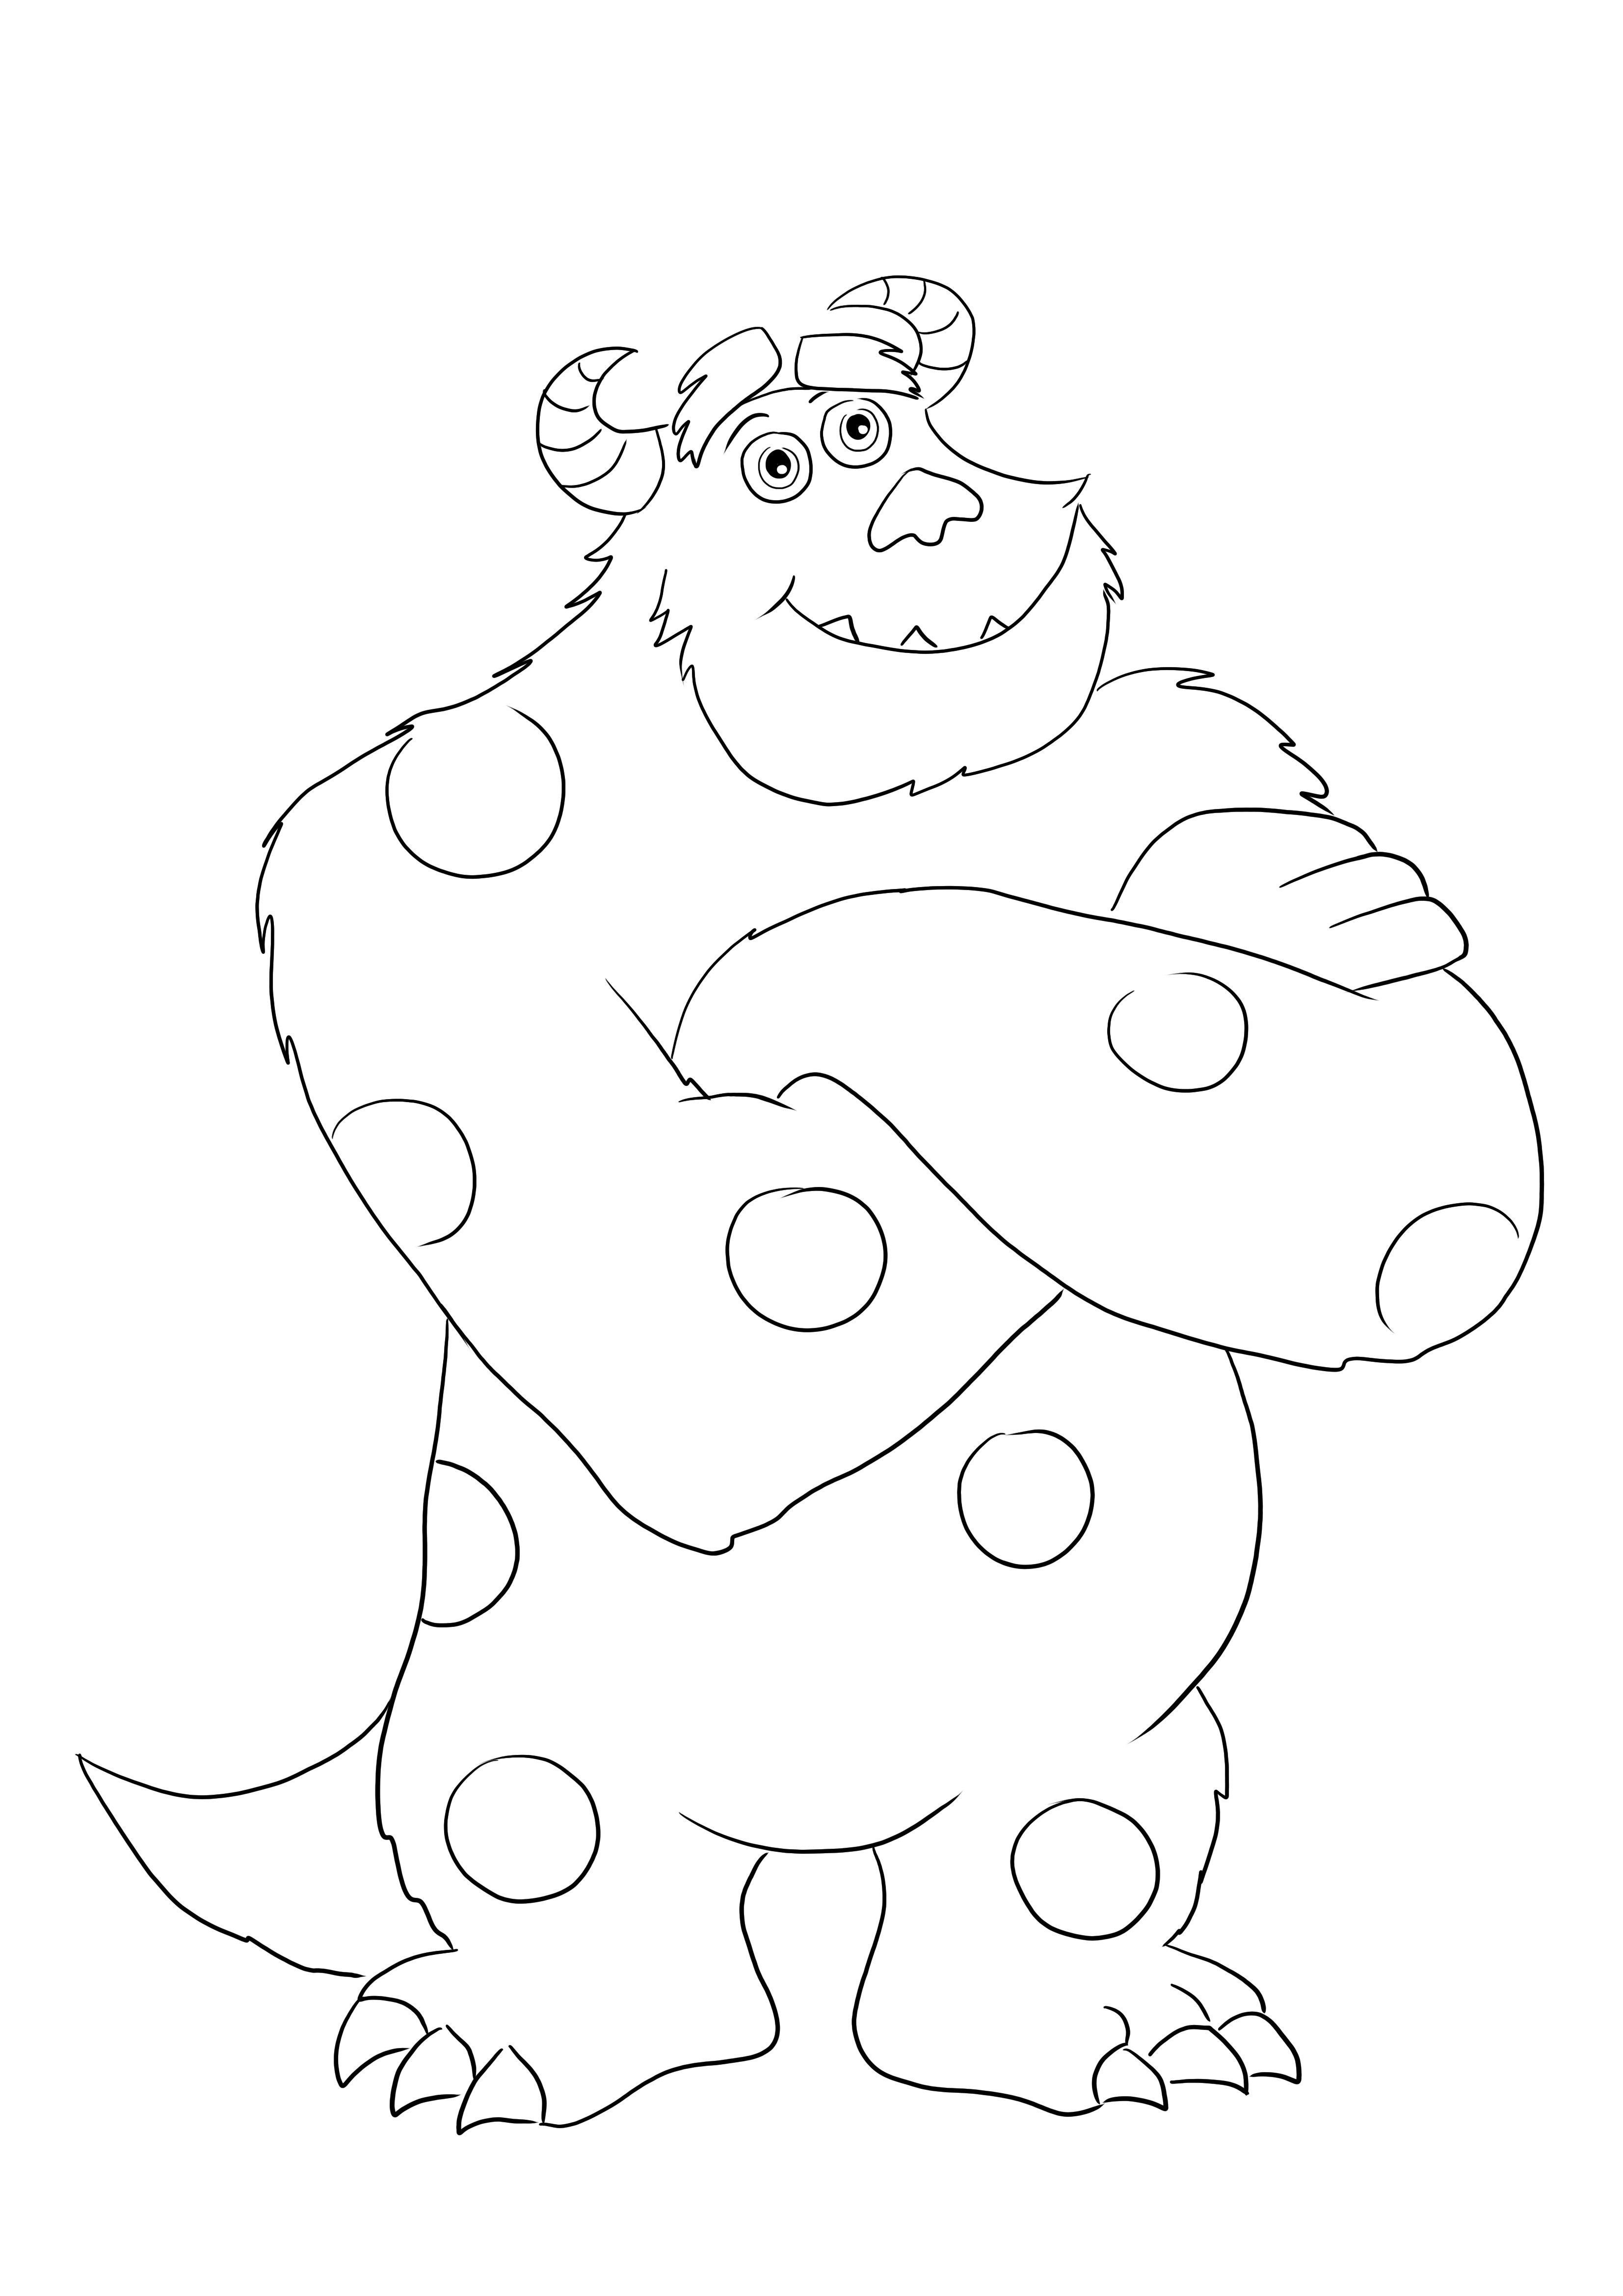 Sulley toy is ready to be printed for free and colored by kids with fun